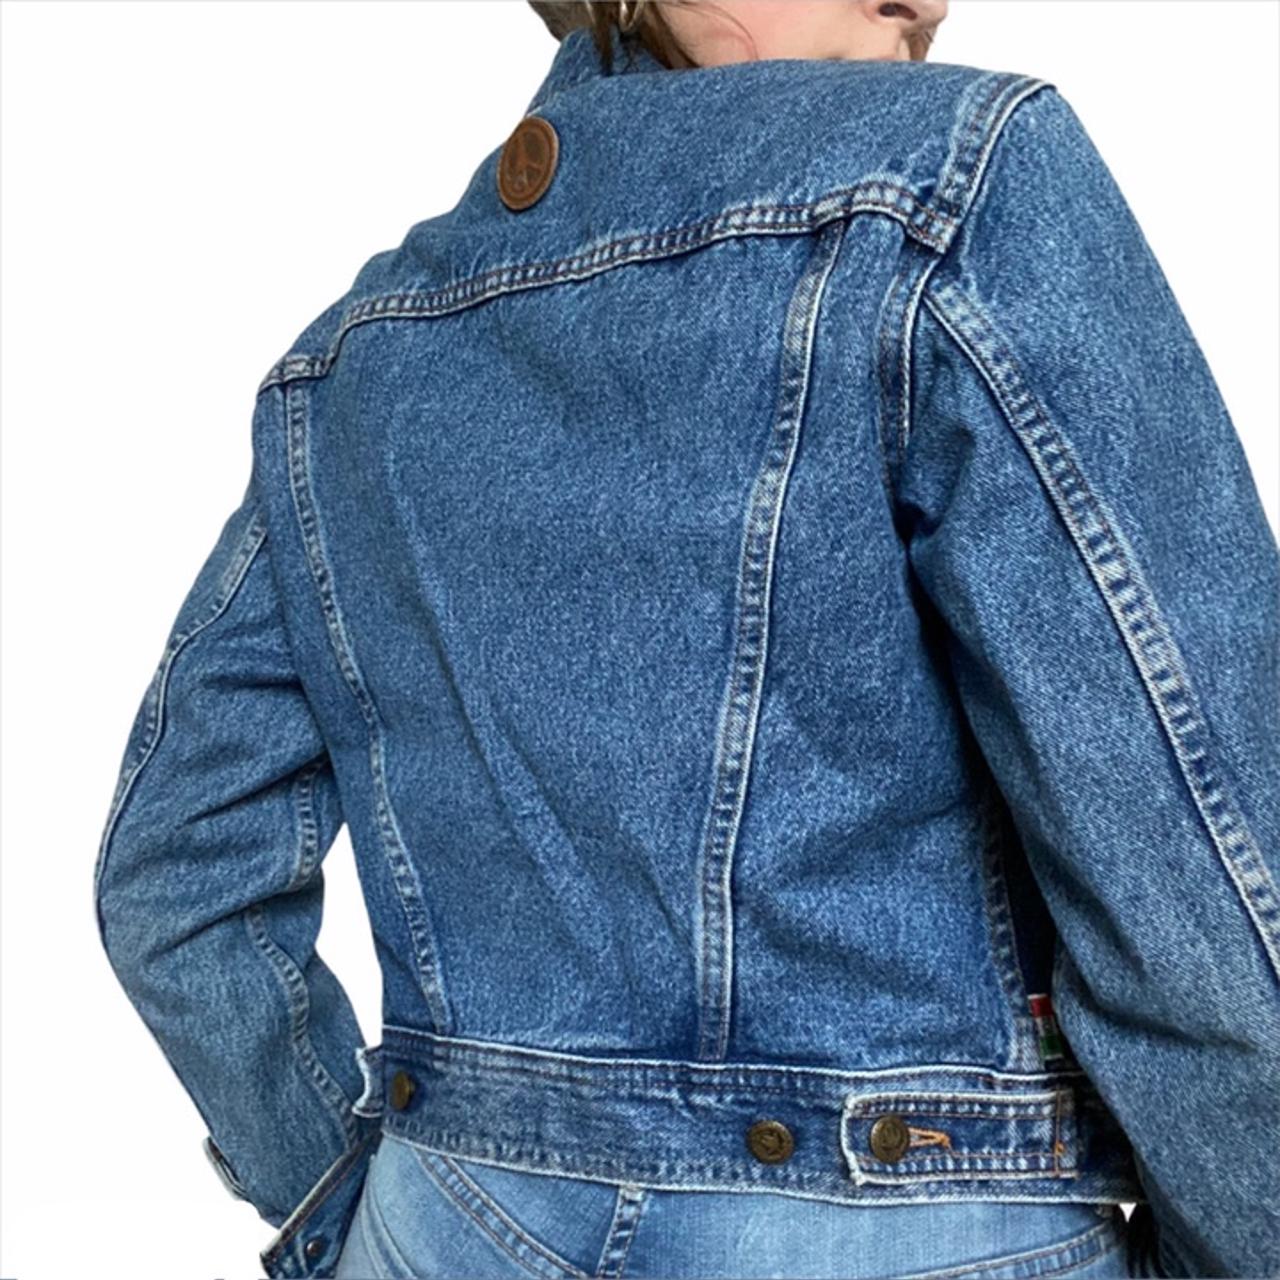 Moschino Jeans Vintage 90s Jean Jacket A classic... - Depop